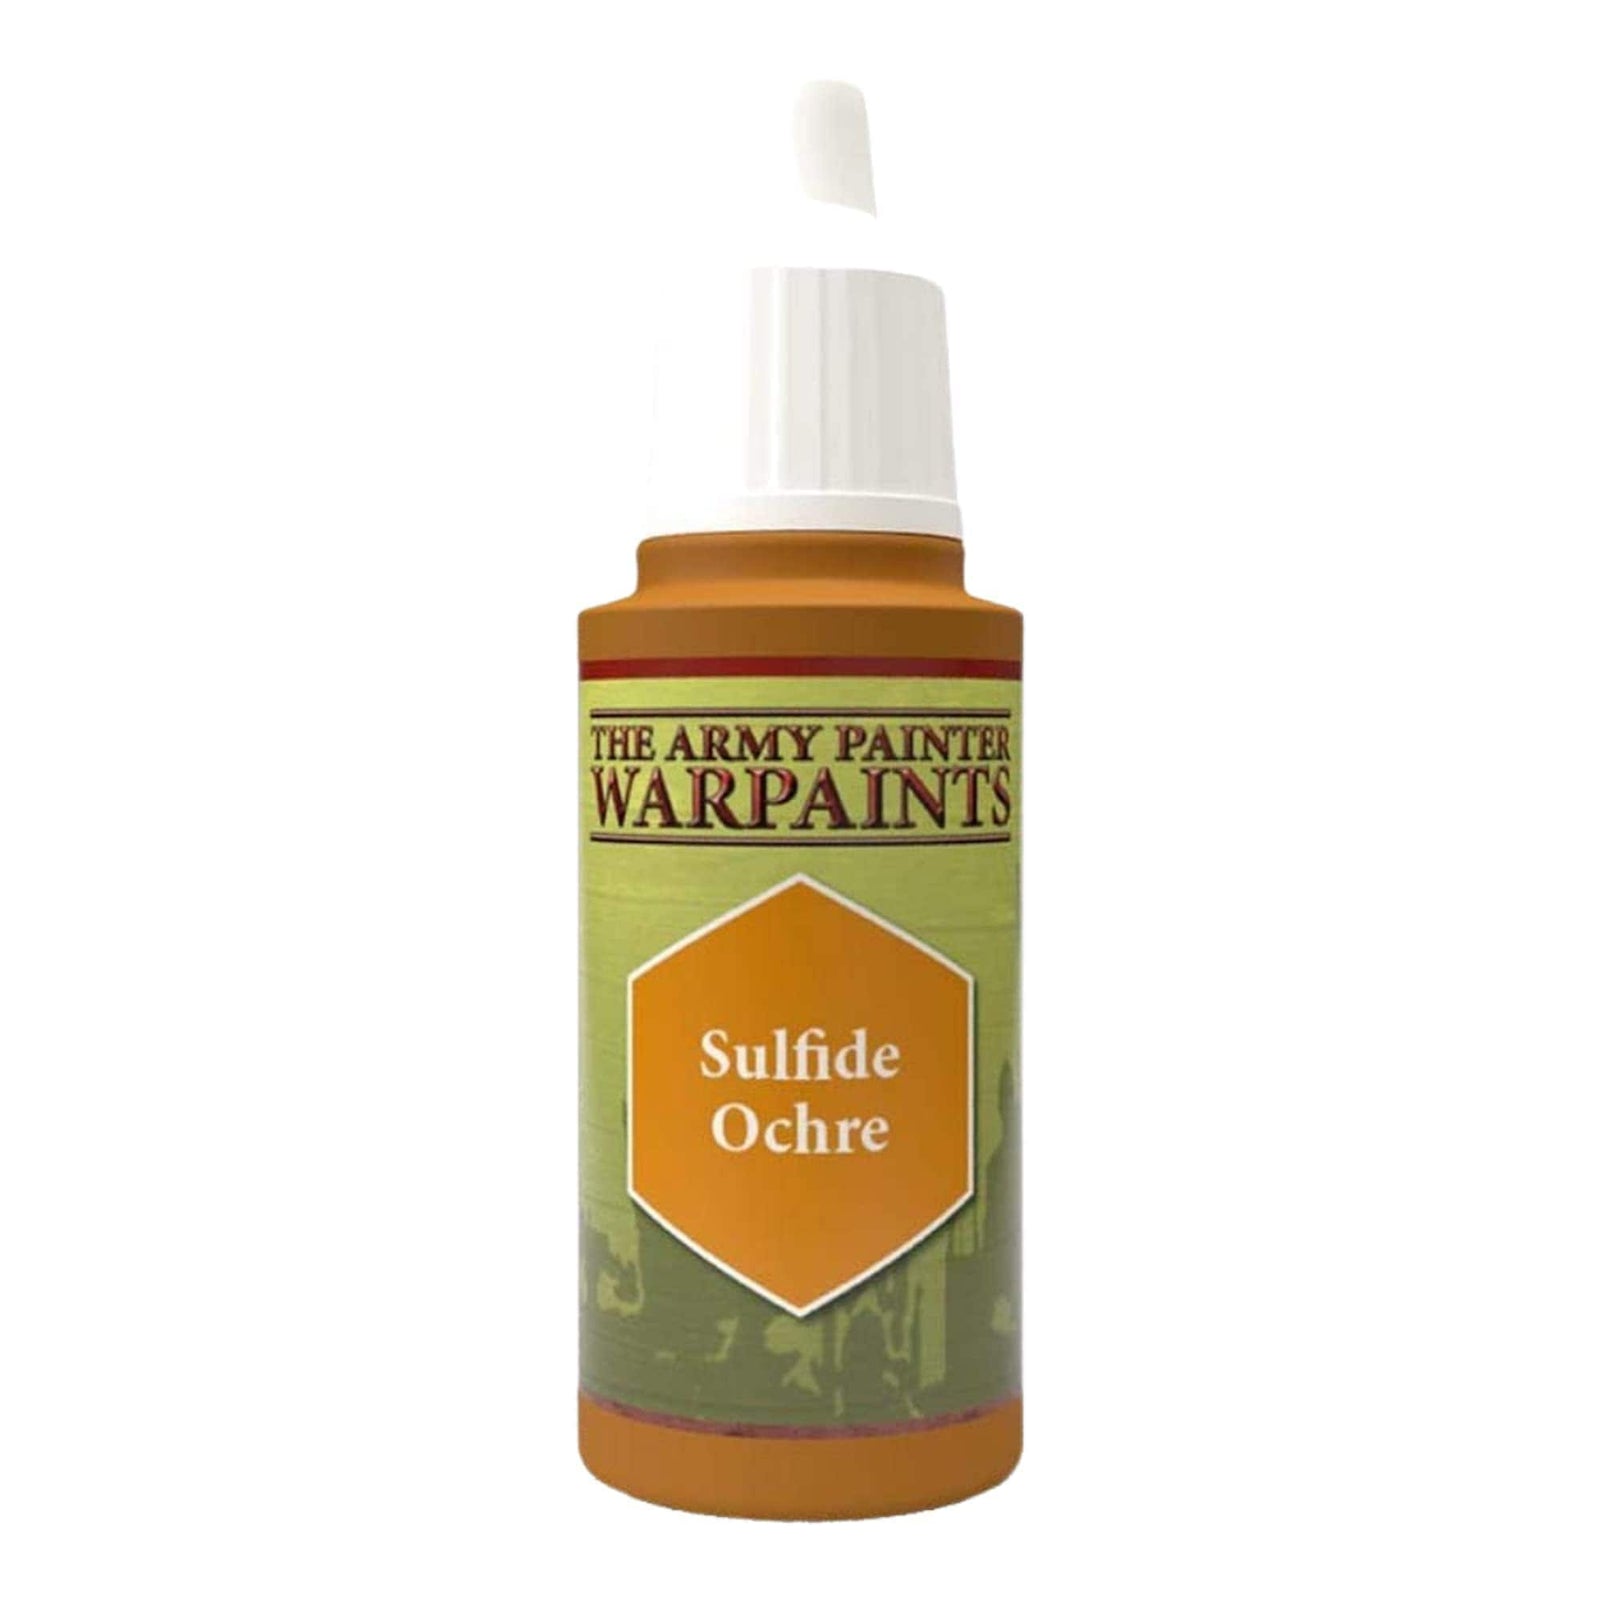 The Army Painter Accessories The Army Painter Warpaints: Sulfide Ochre 18ml